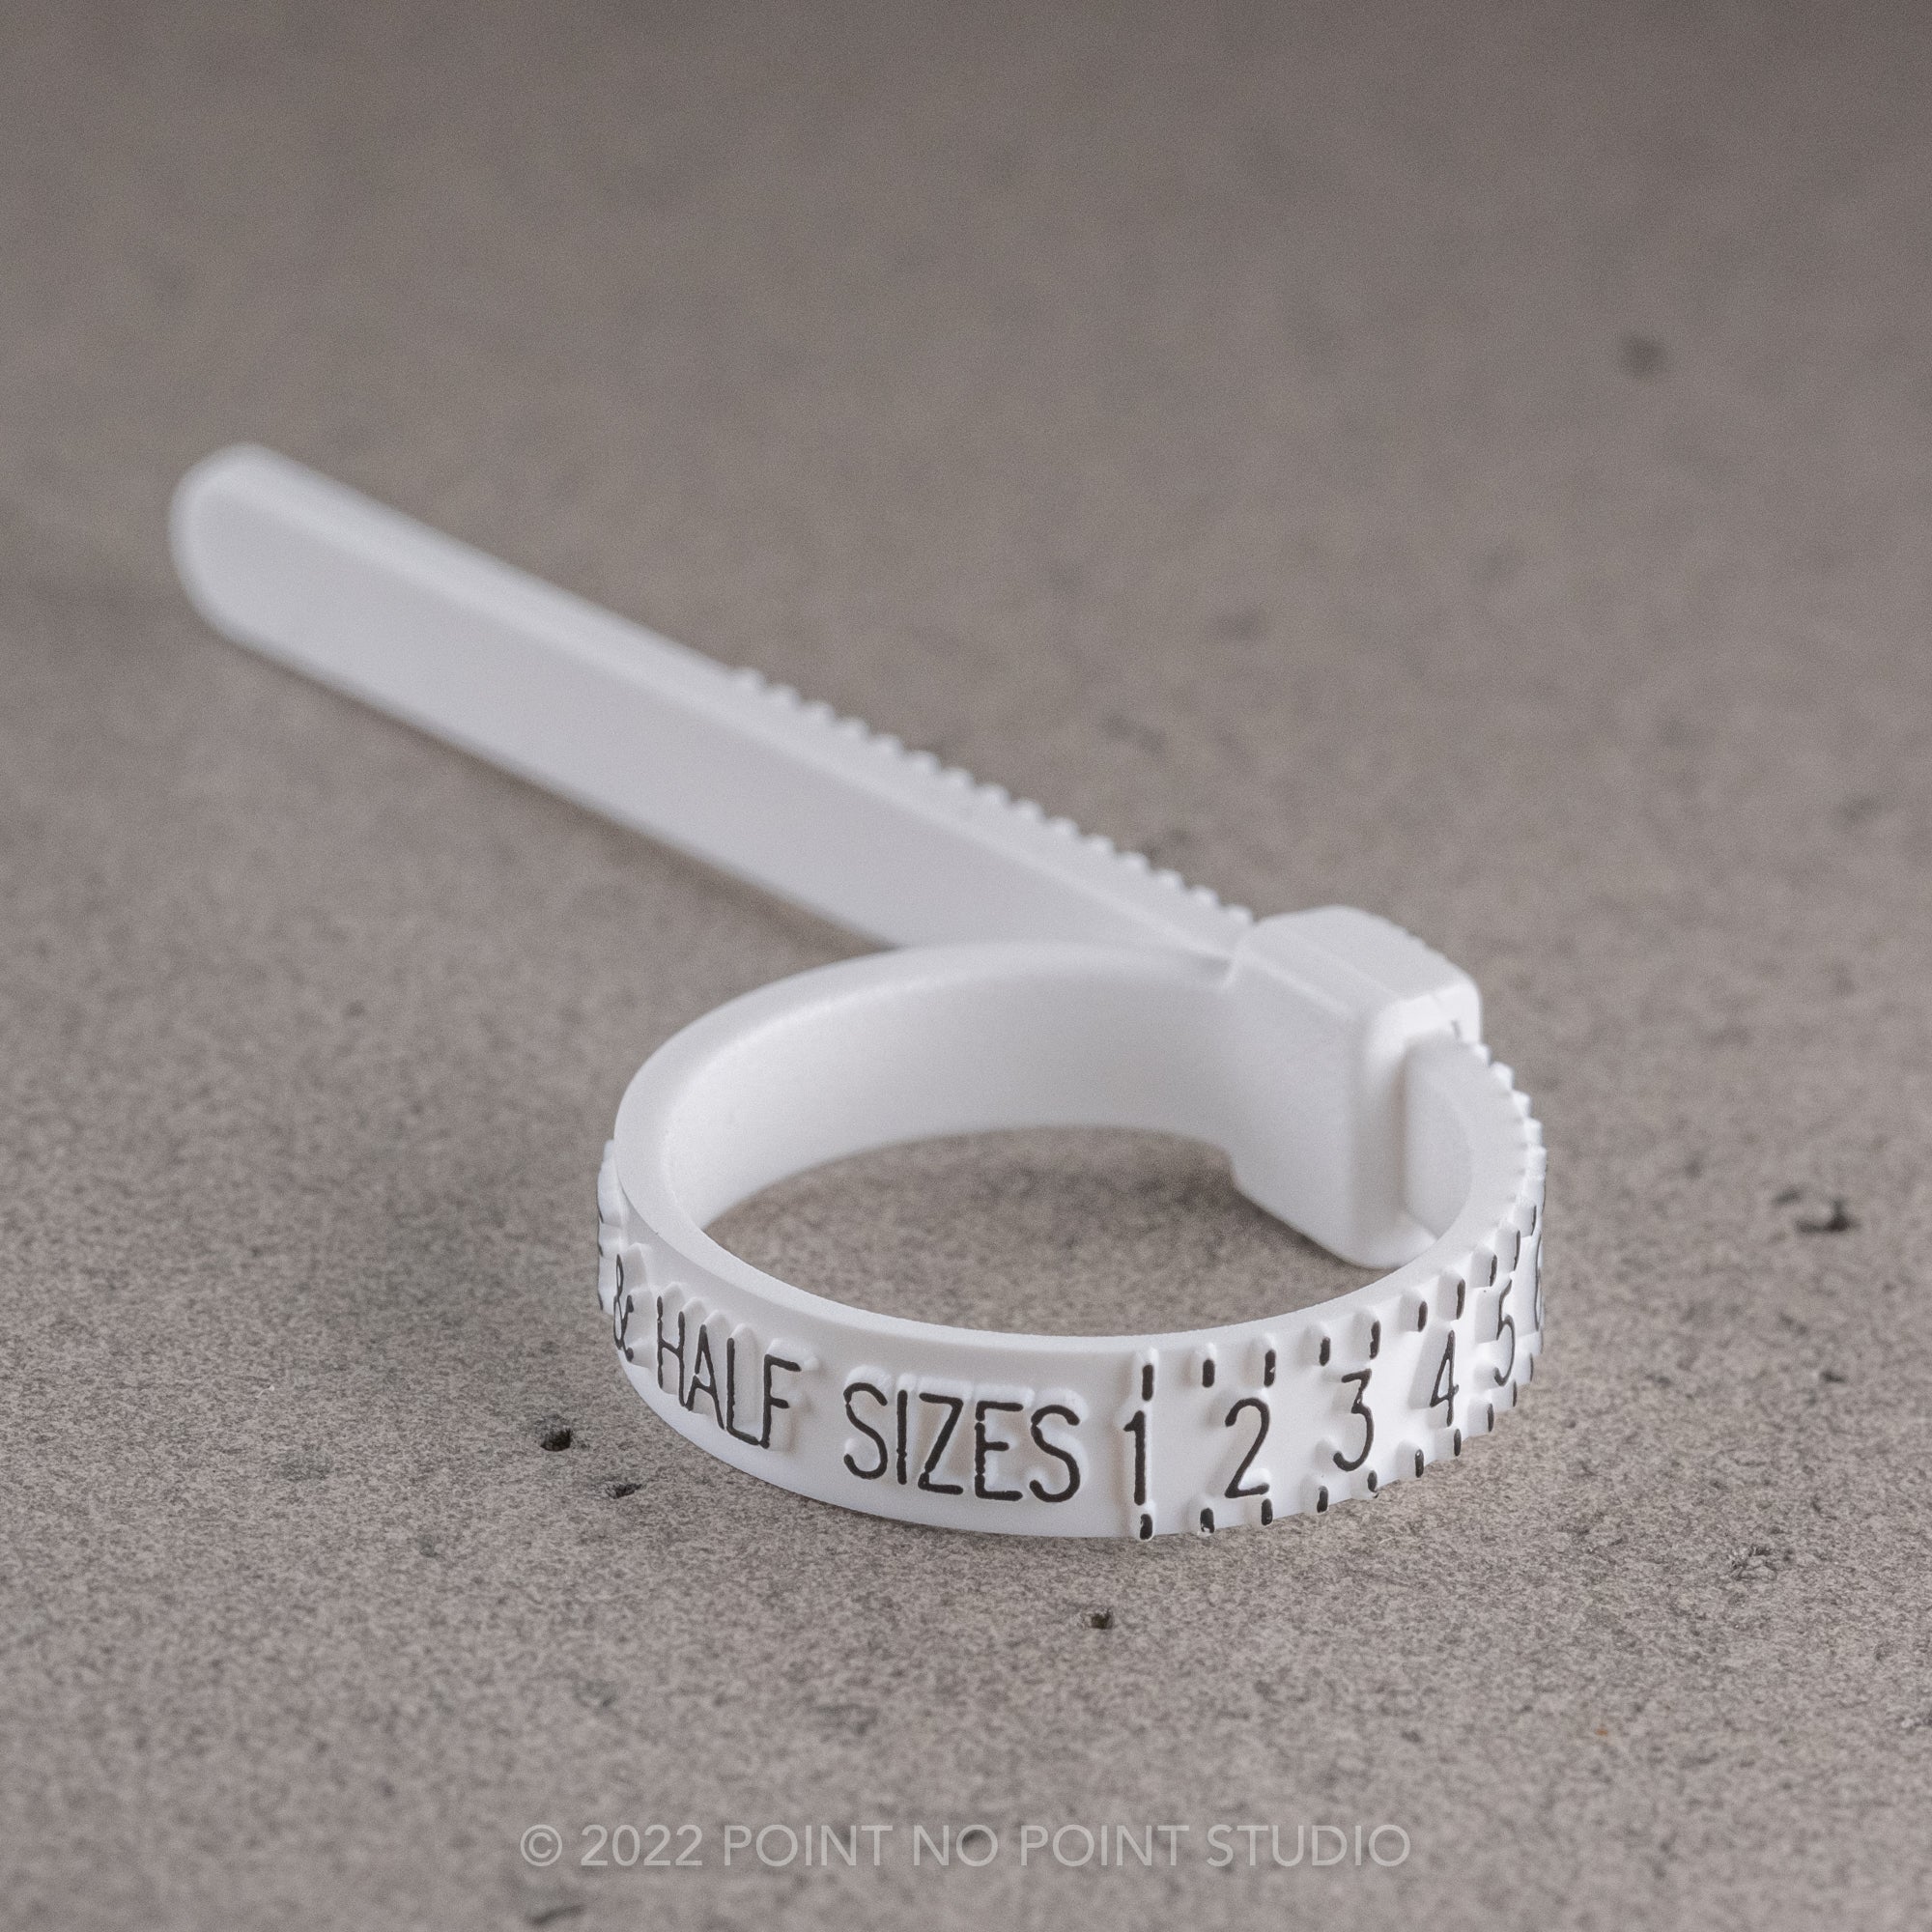 How to Determine Your Ring Size (Free Ring Sizer)